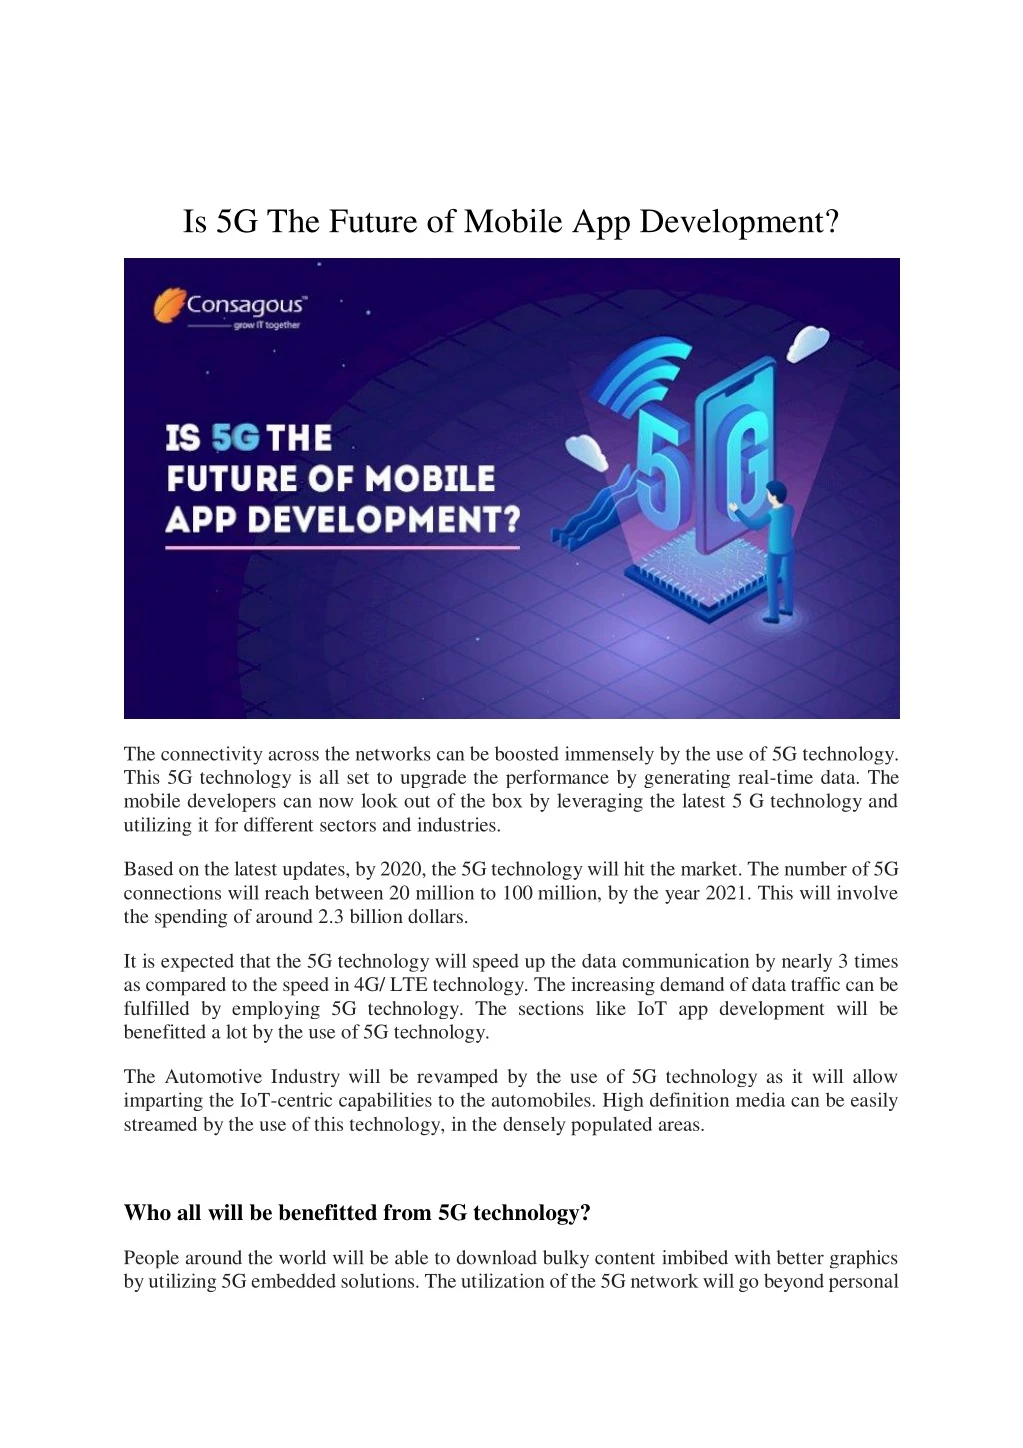 is 5g the future of mobile app development